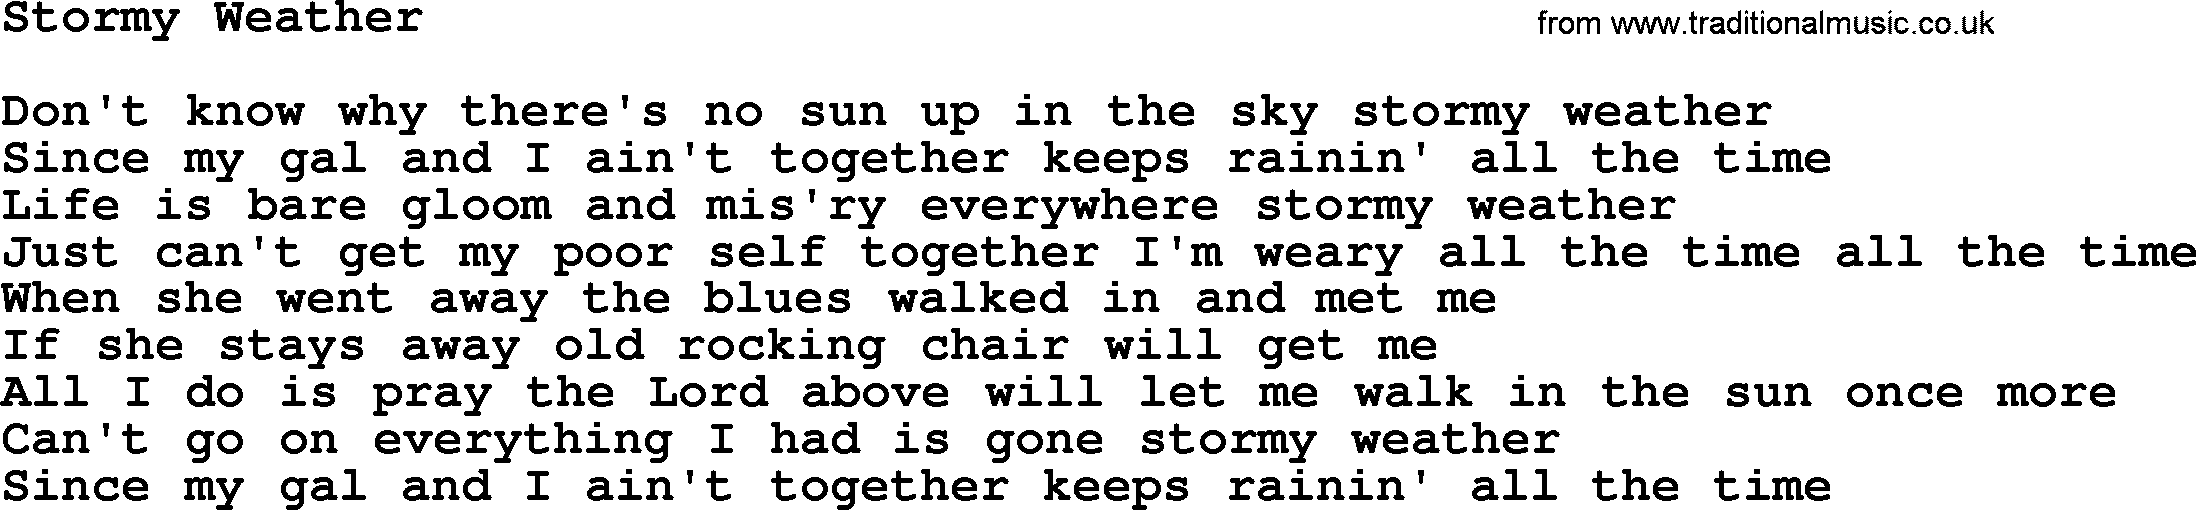 Willie Nelson song: Stormy Weather lyrics